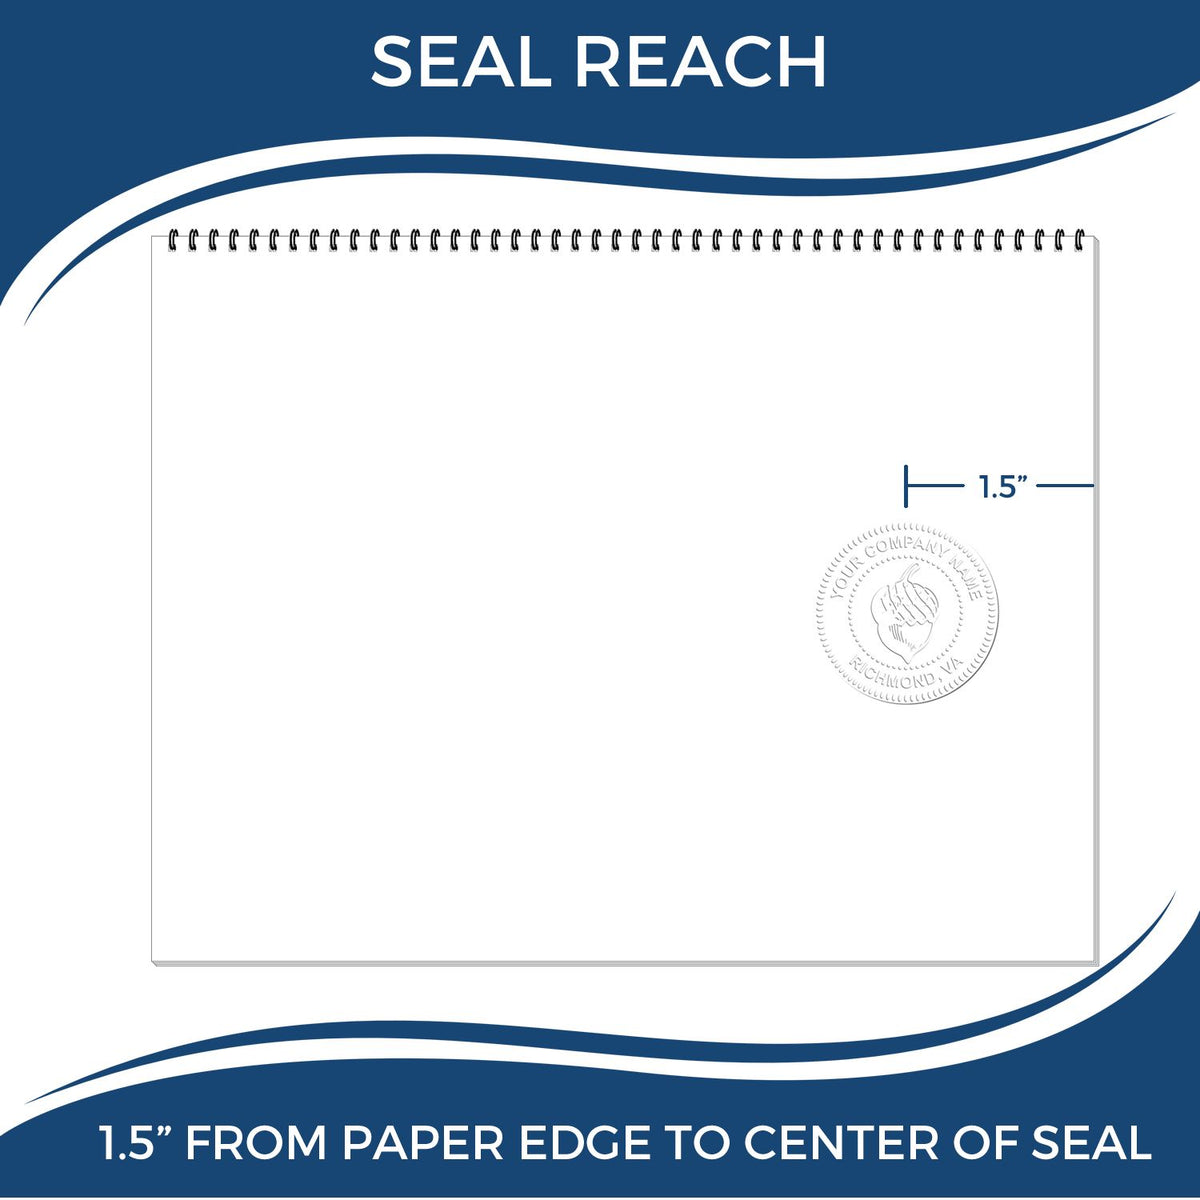 An infographic showing the seal reach which is represented by a ruler and a miniature seal image of the New Mexico Geologist Desk Seal